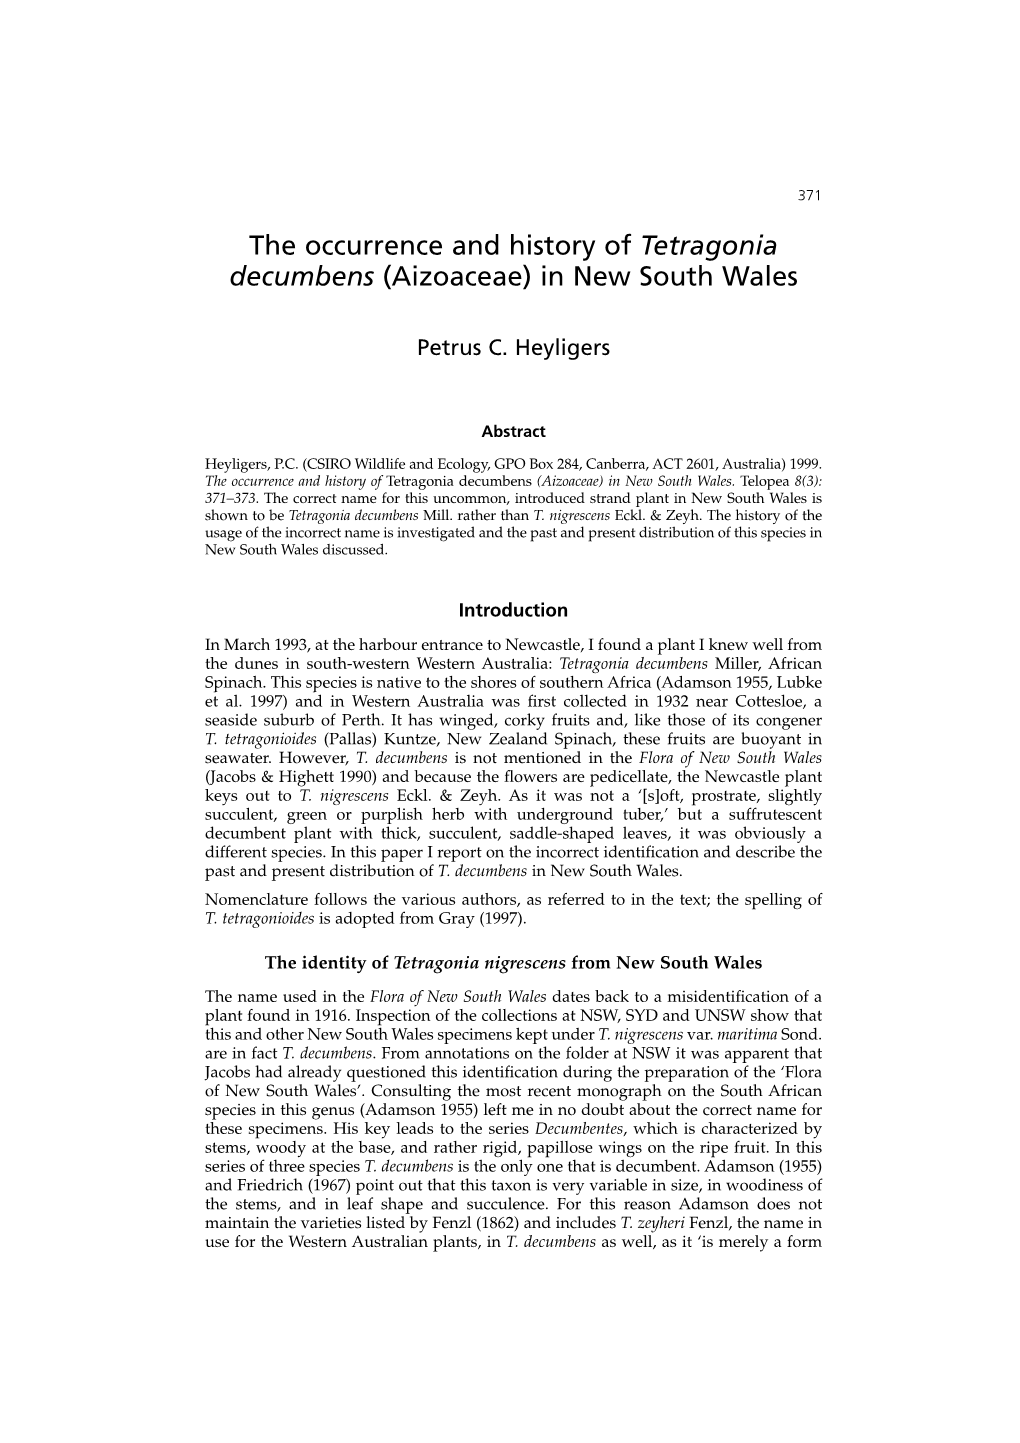 The Occurrence and History of Tetragonia Decumbens (Aizoaceae) in New South Wales